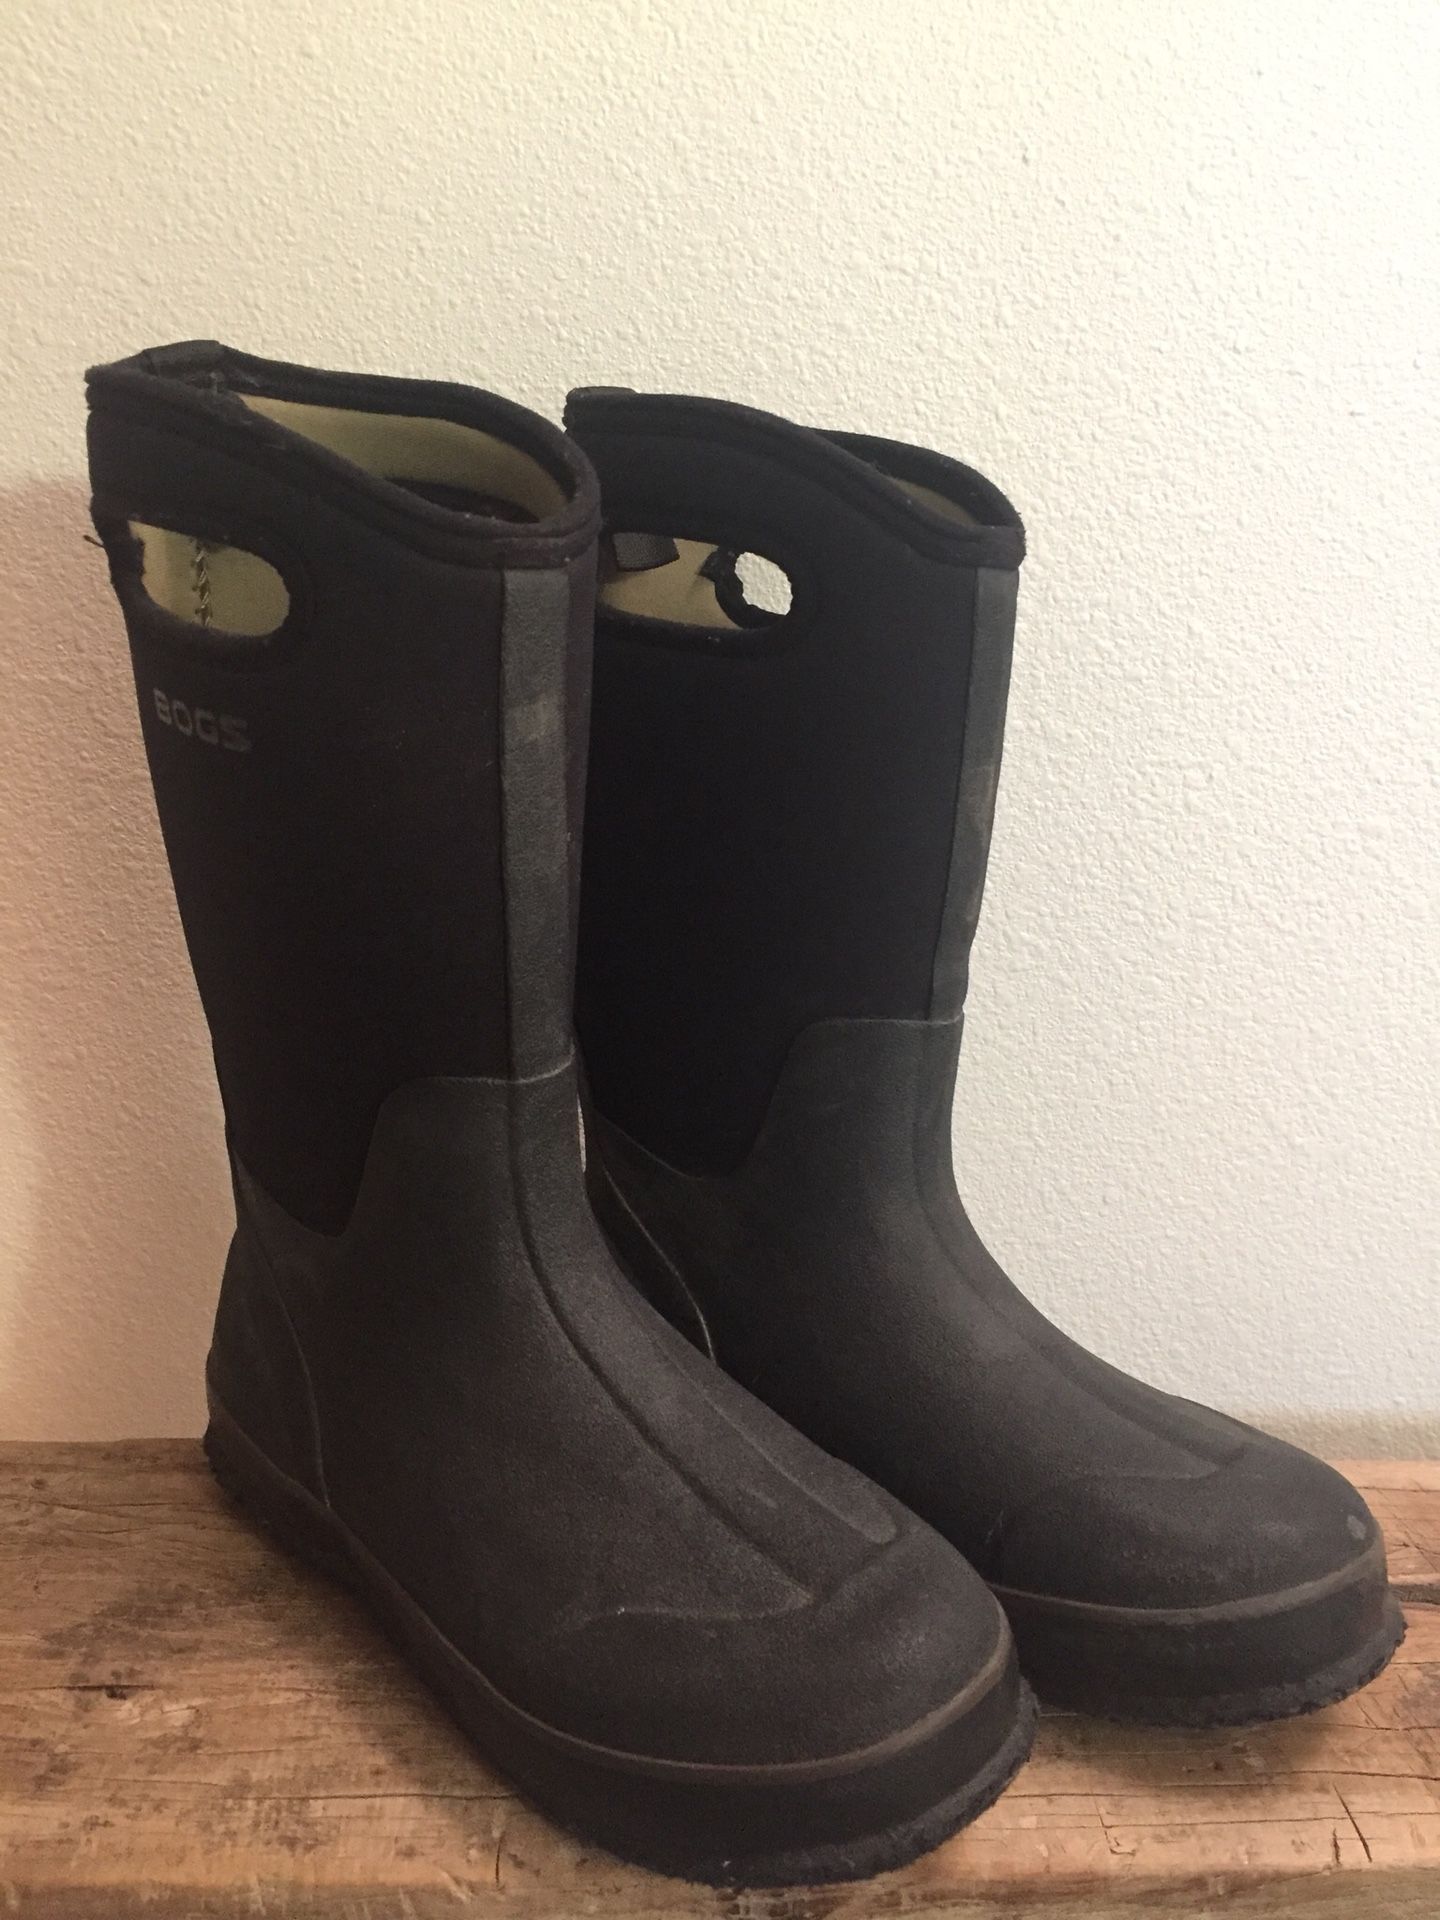 Size 4 Insulated BOGS boots- 30 below